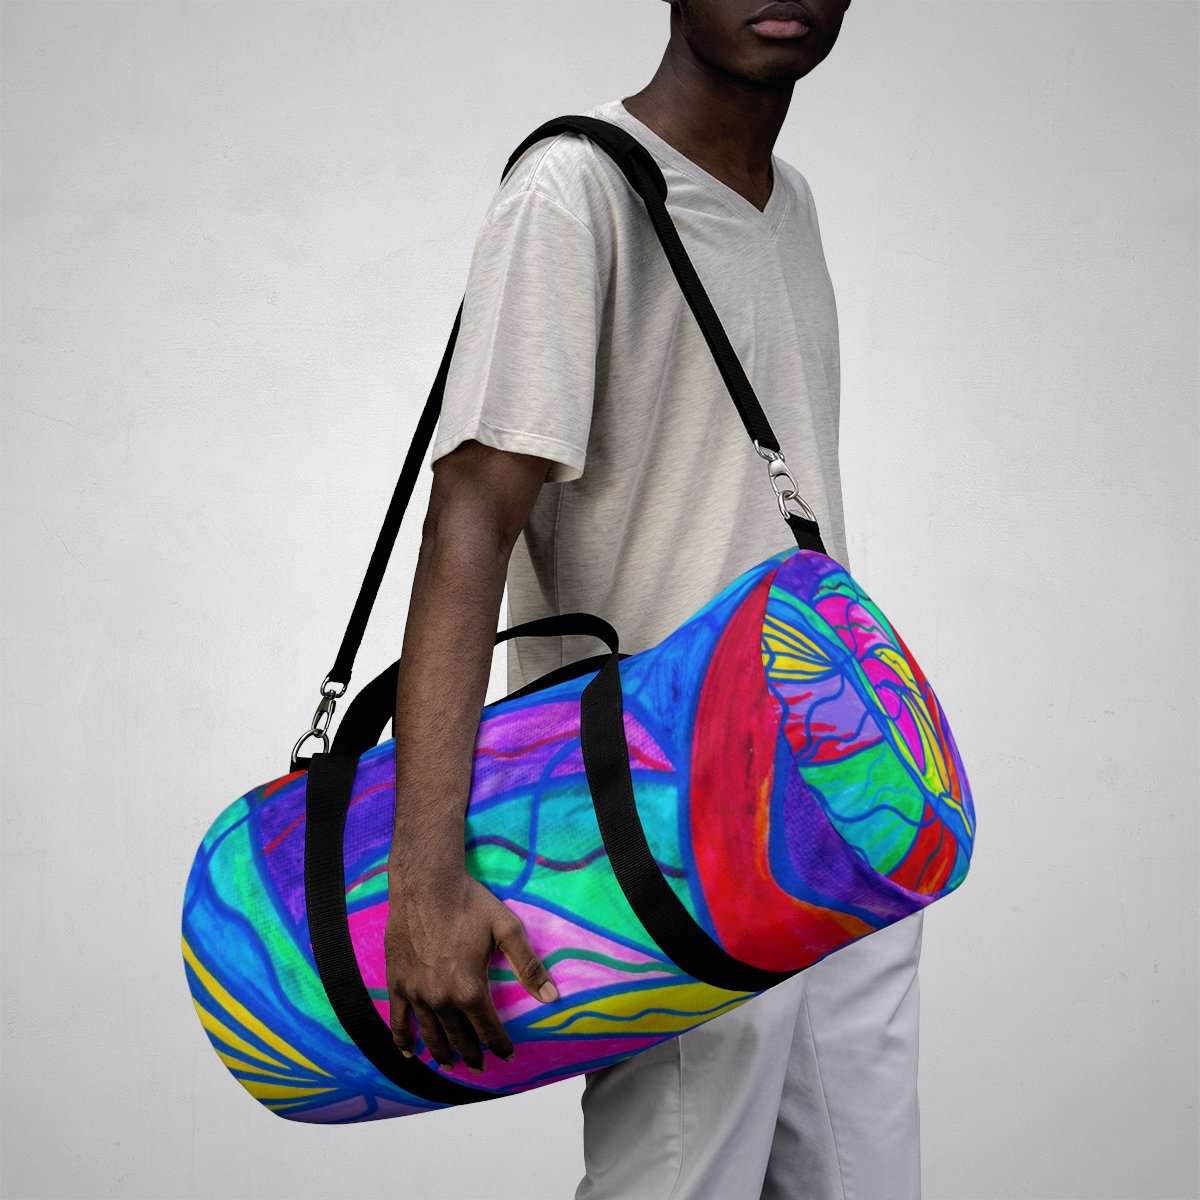 its-not-easy-being-a-fan-to-buy-drastic-change-duffle-bag-online_11.jpg